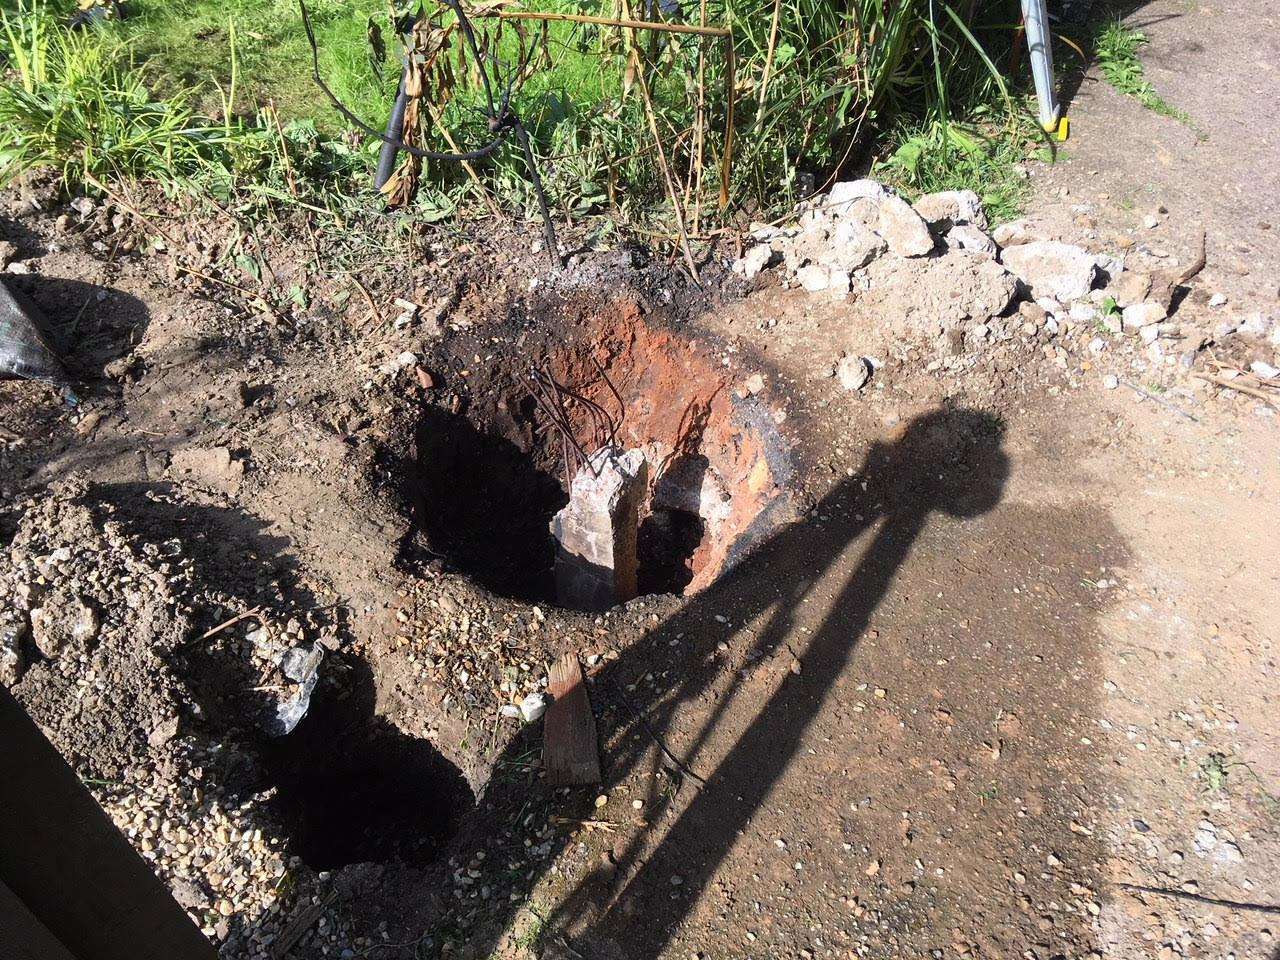 The hole left after the pipe was damaged